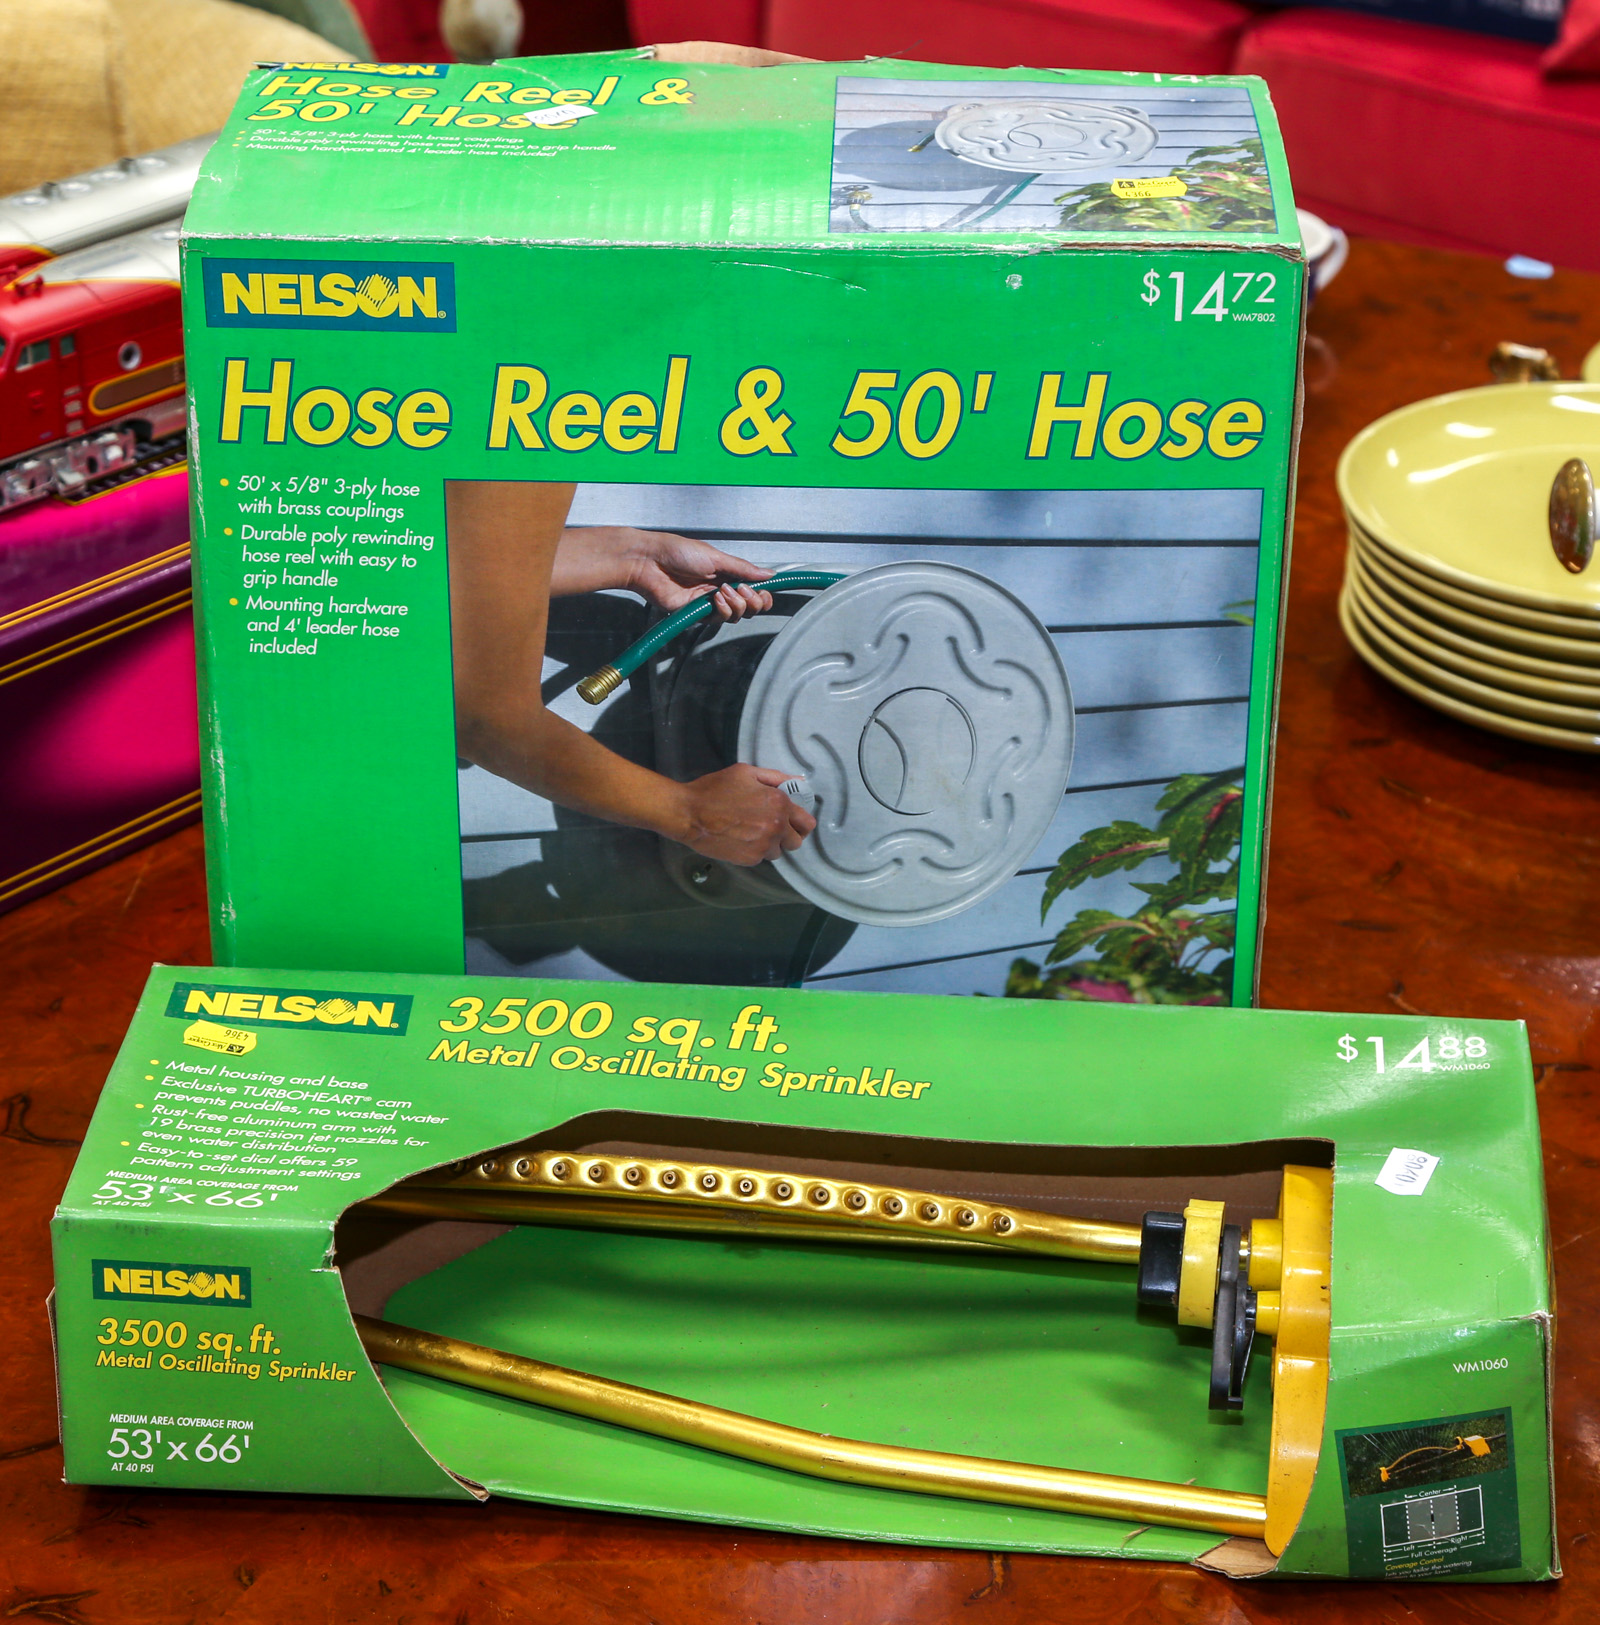 TWO NELSON OUTDOOR/GARDENING PRODUCTS